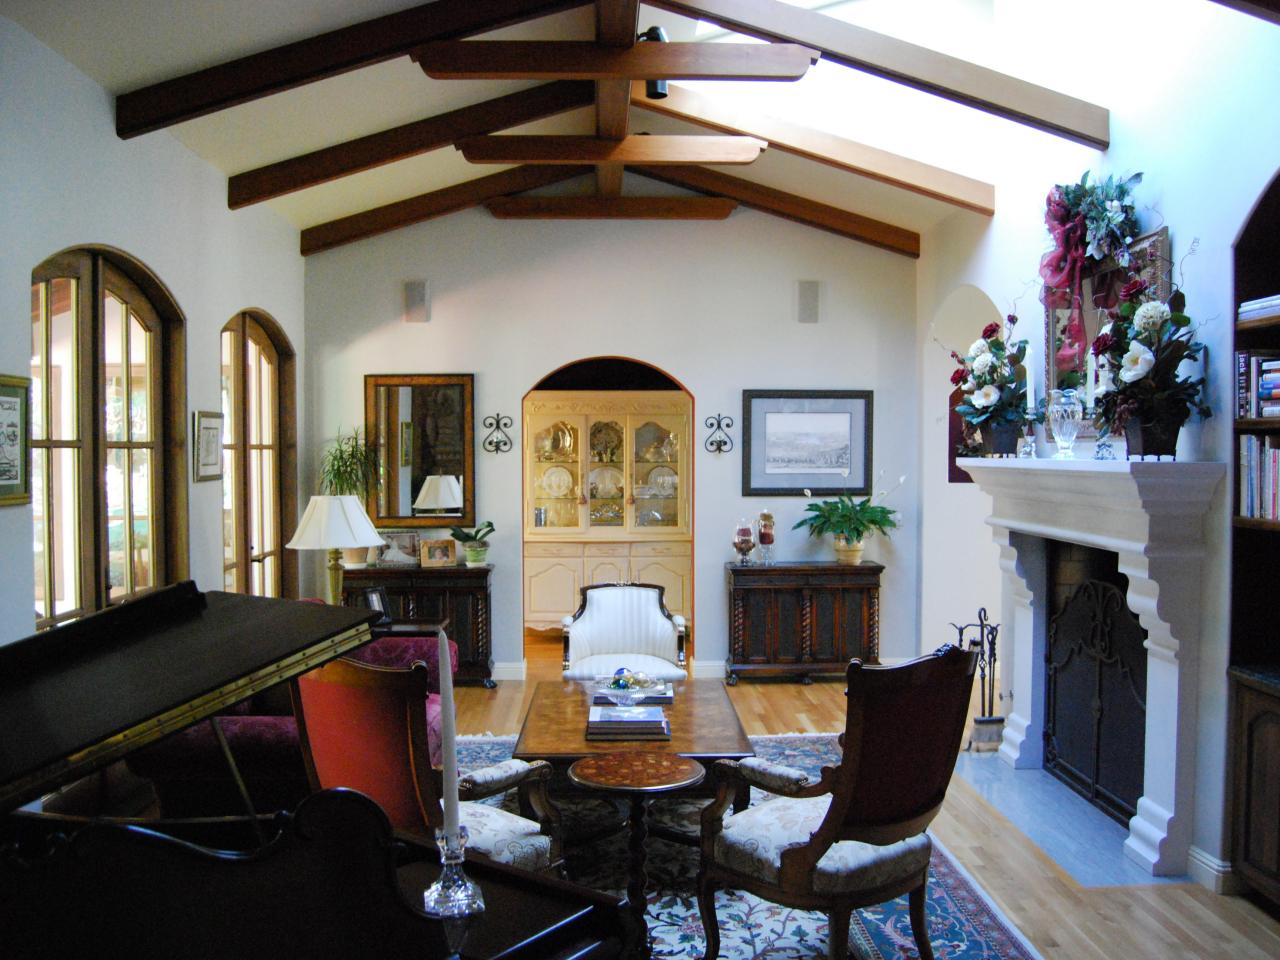 Spanish-Style Living Room With Wooden Ceiling Beams | HGTV